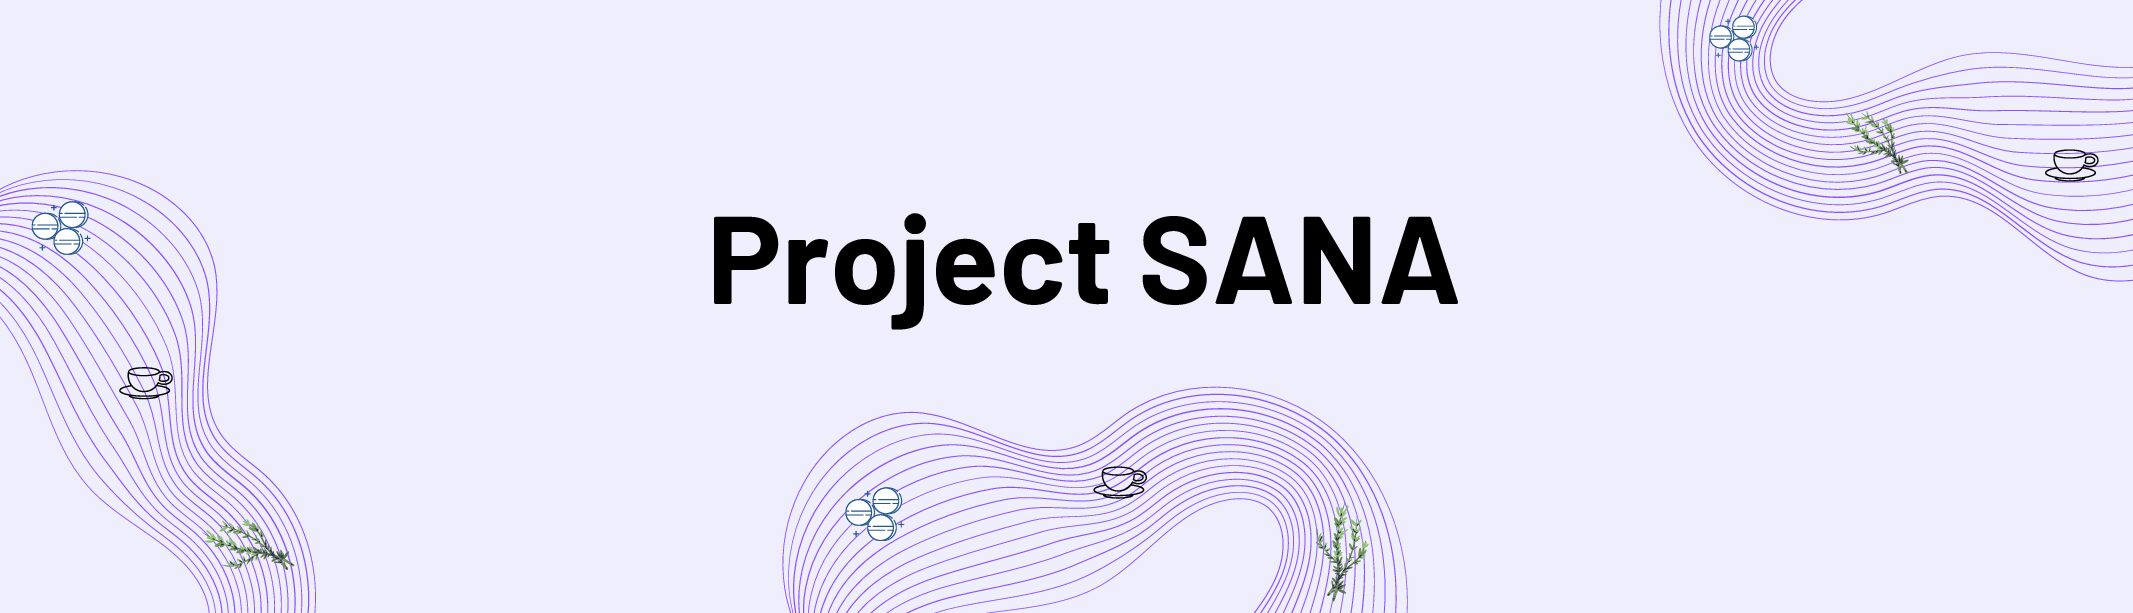 Project SANA in the Upshot